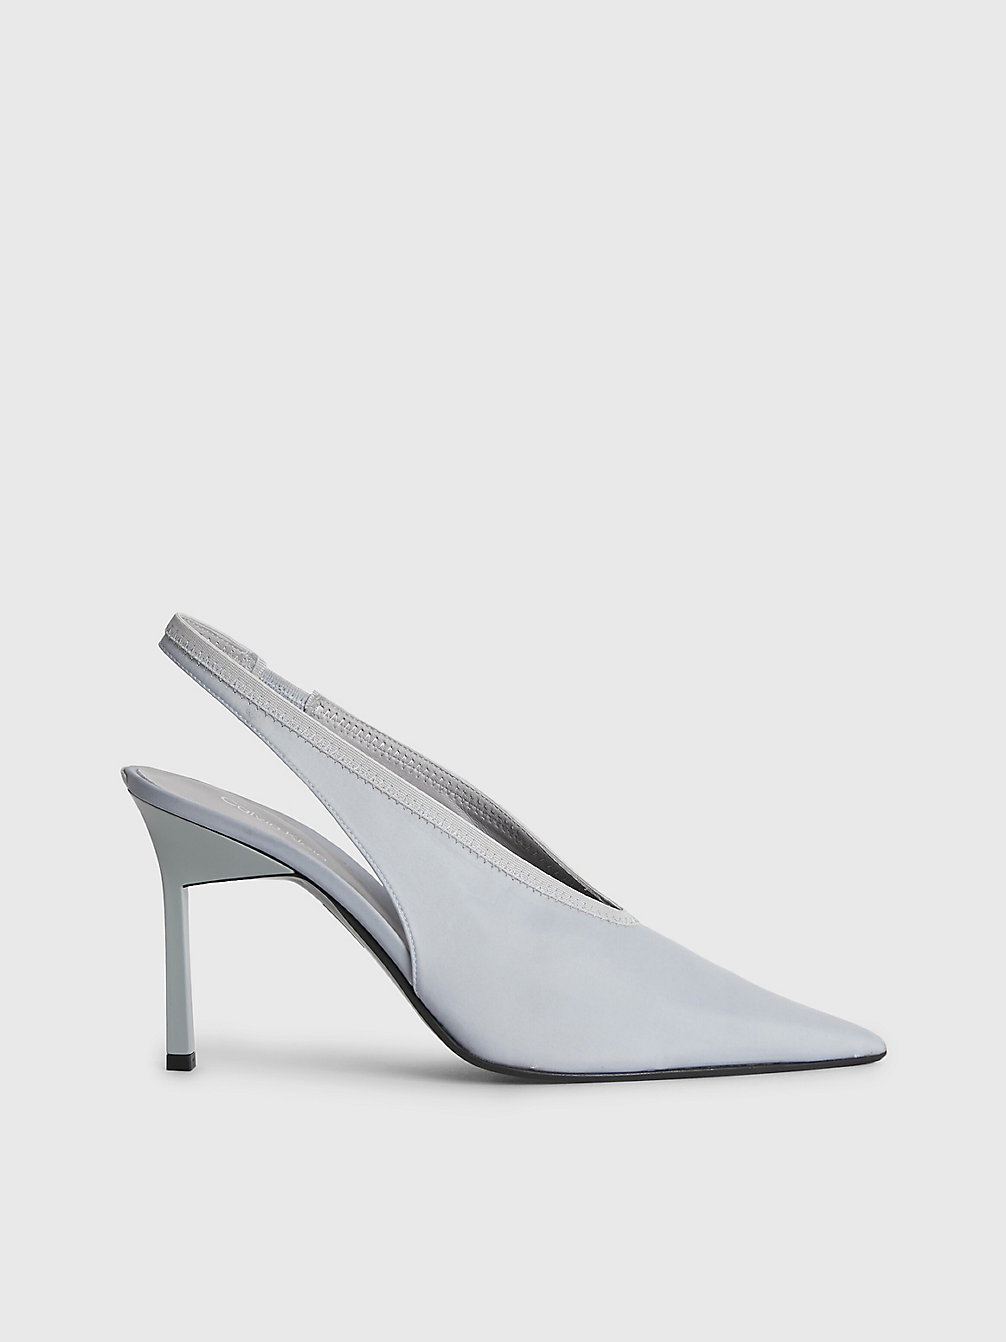 PEARL BLUE Recycled Nylon Pumps undefined women Calvin Klein